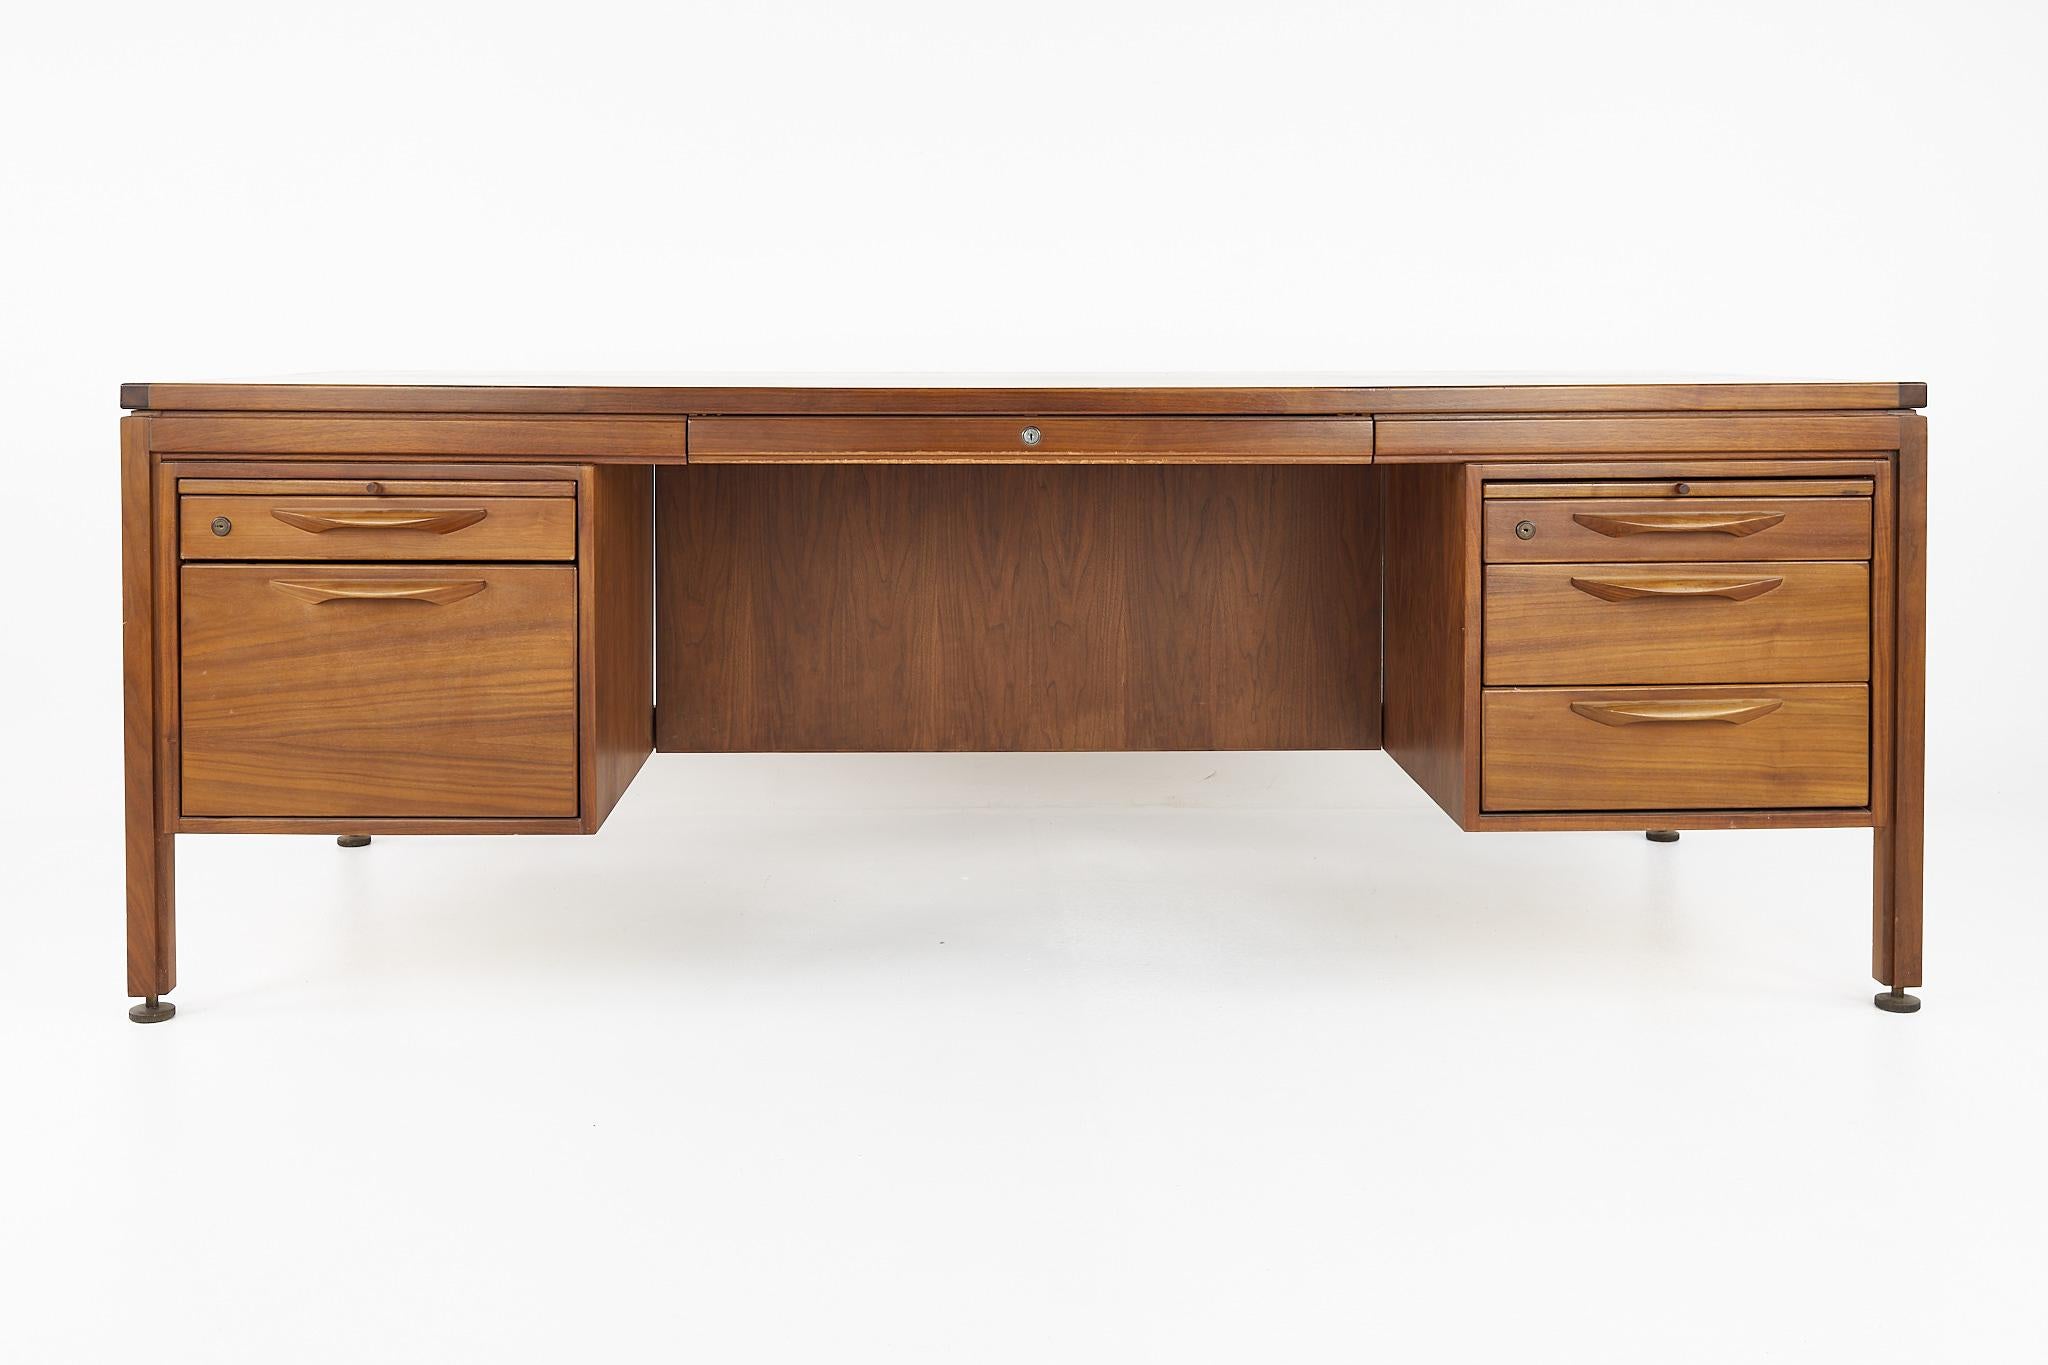 Jens Risom mid century walnut executive desk

This desk measures: 81 wide x 36 deep x 28.5 inches high

All pieces of furniture can be had in what we call restored vintage condition. That means the piece is restored upon purchase so it’s free of